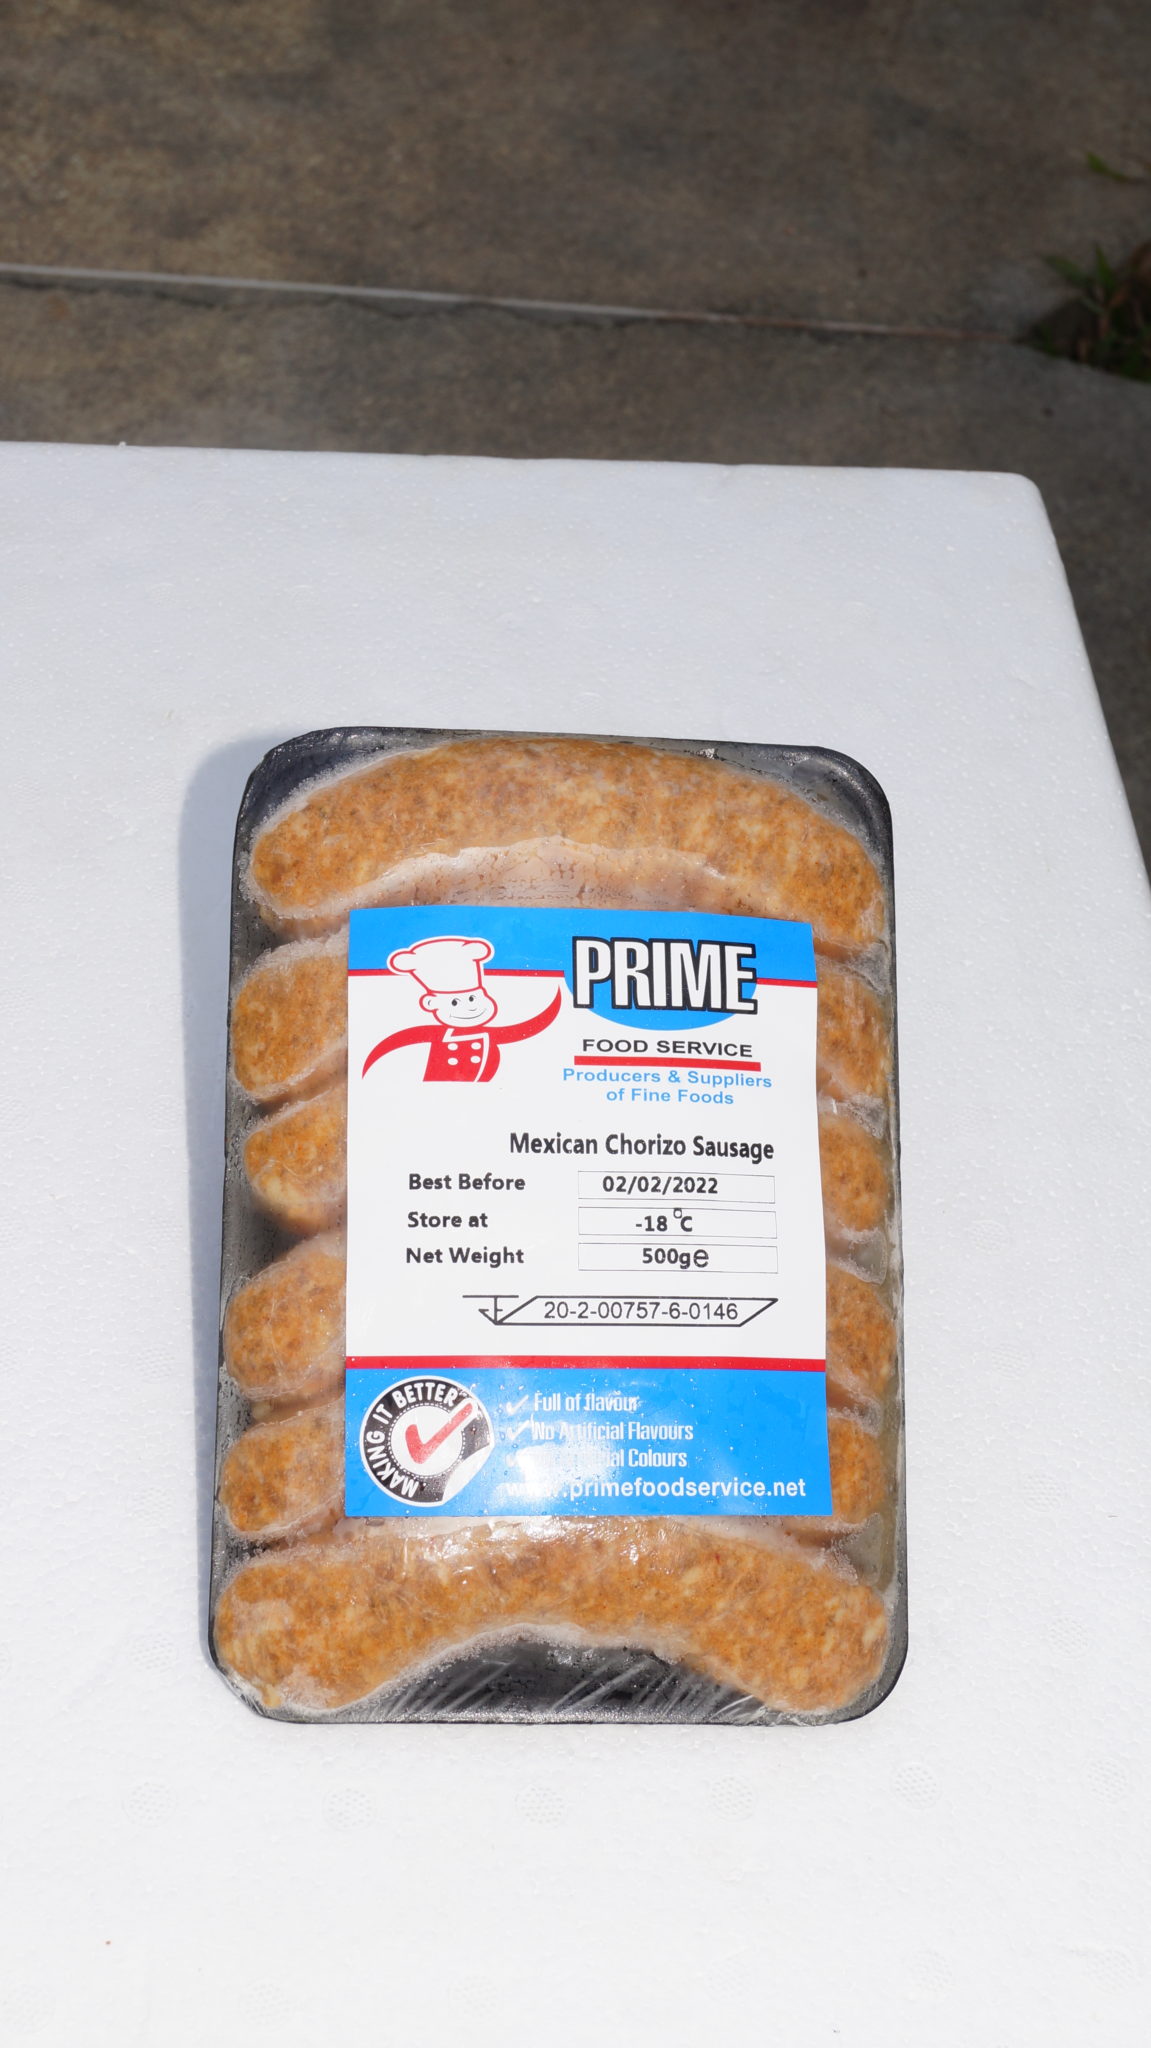 Mexican chorizo sausage by Prime Food Service